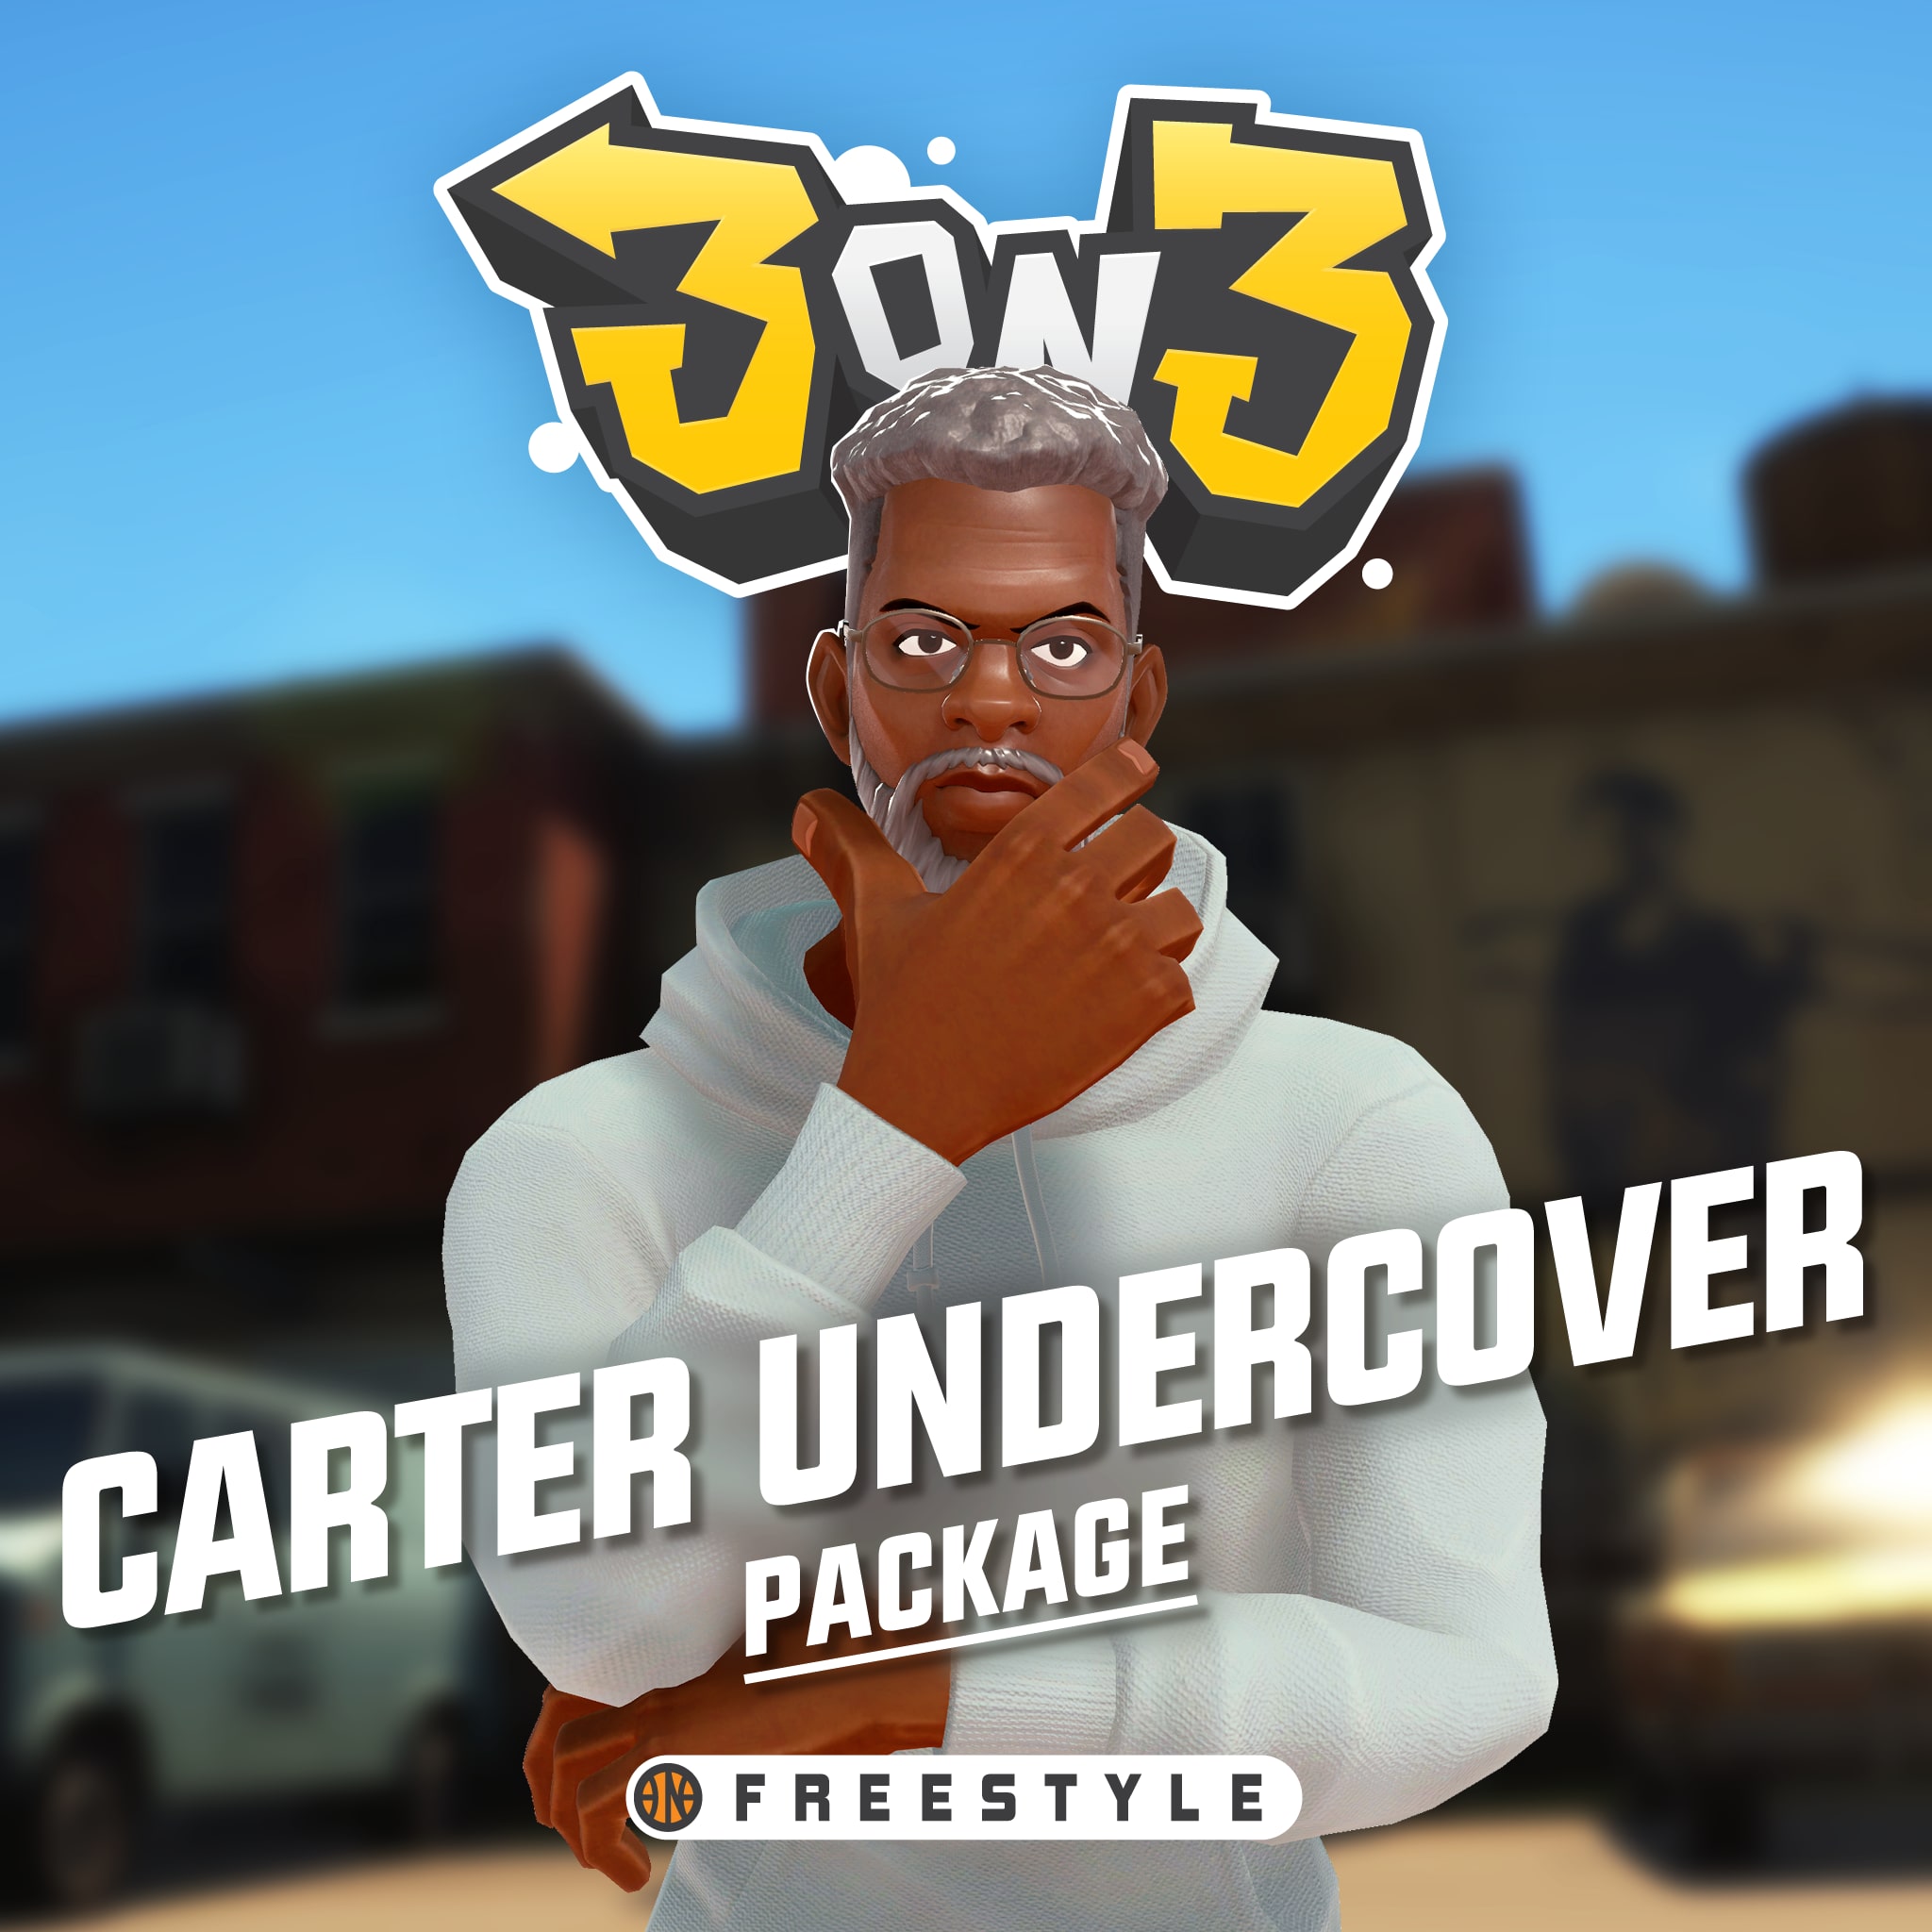 3on3 FreeStyle - Paquete encubierto Carter